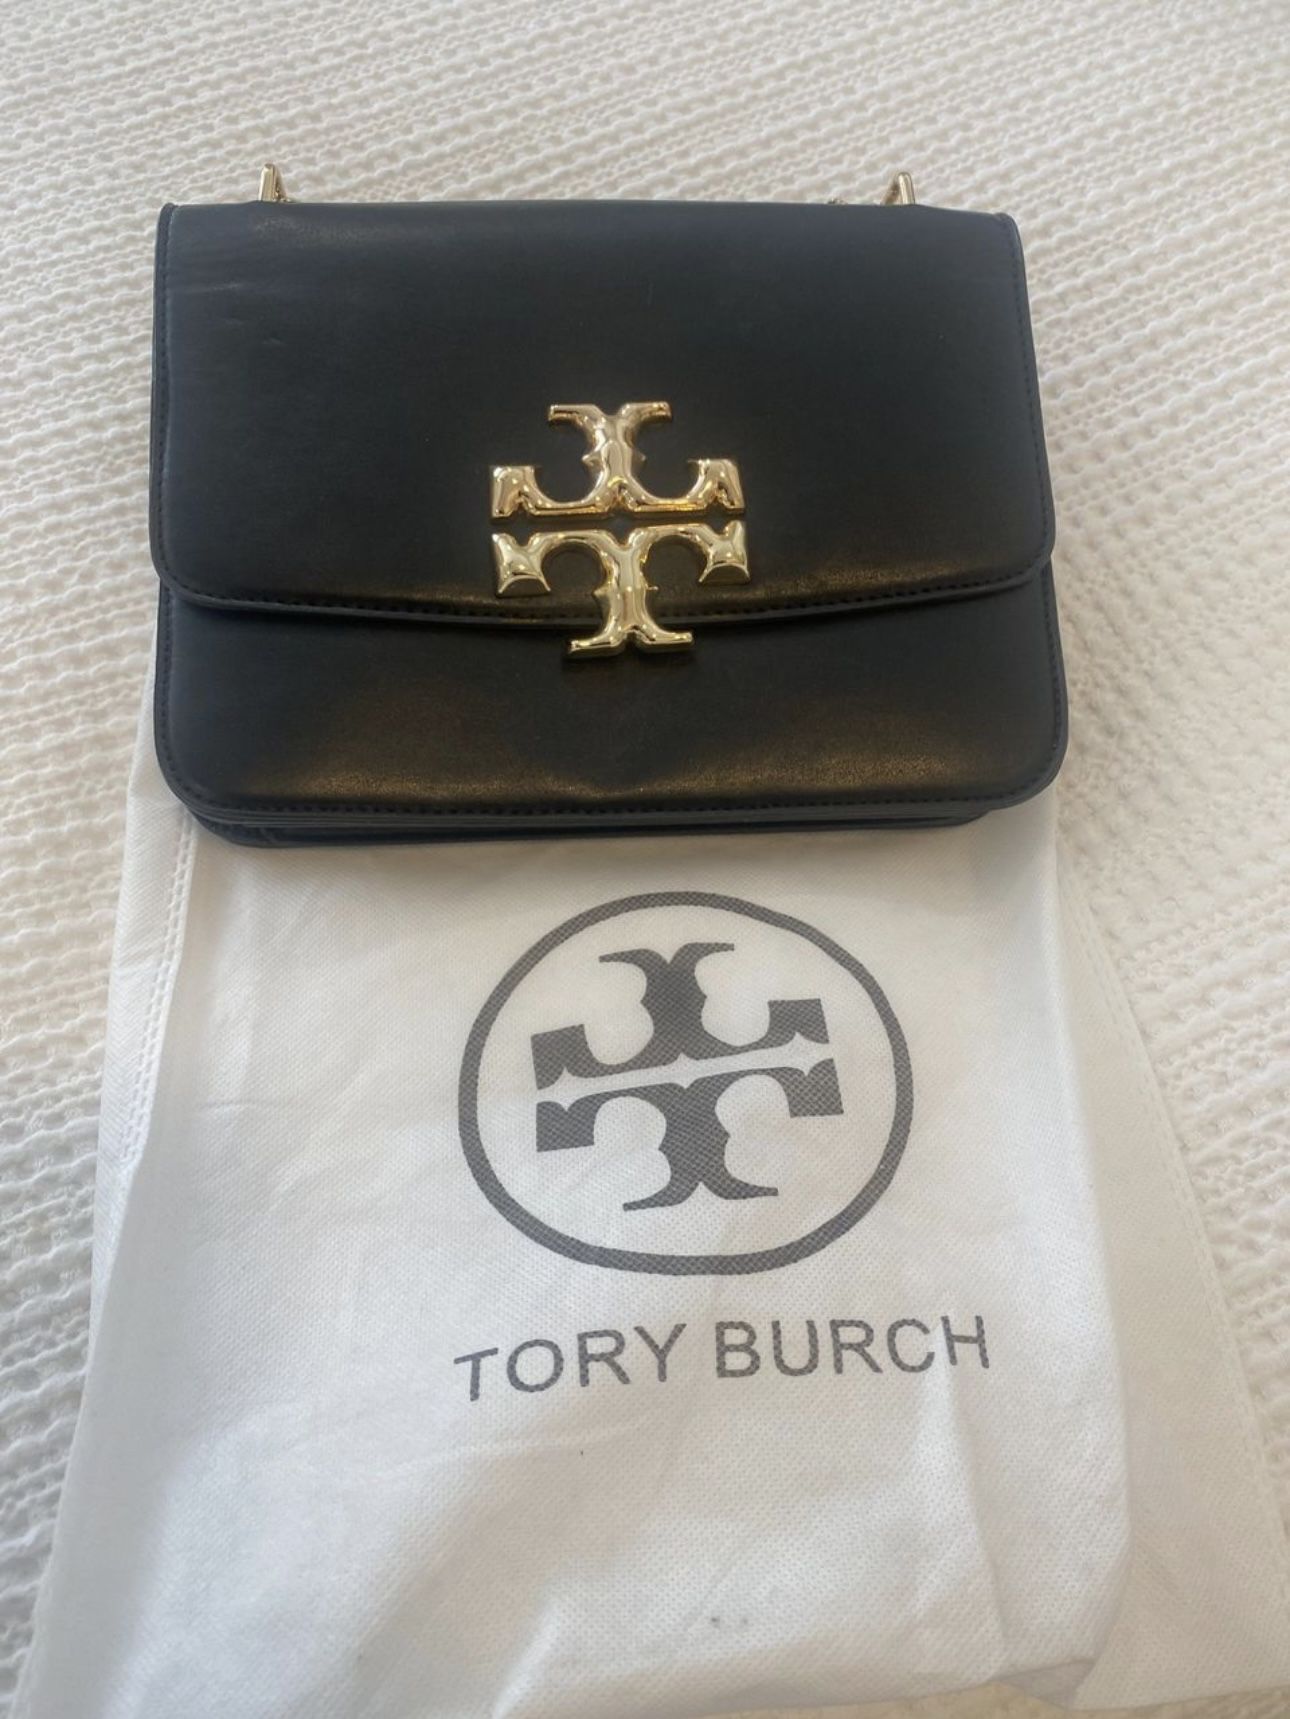 Tory Burch Bag With Gold Chain